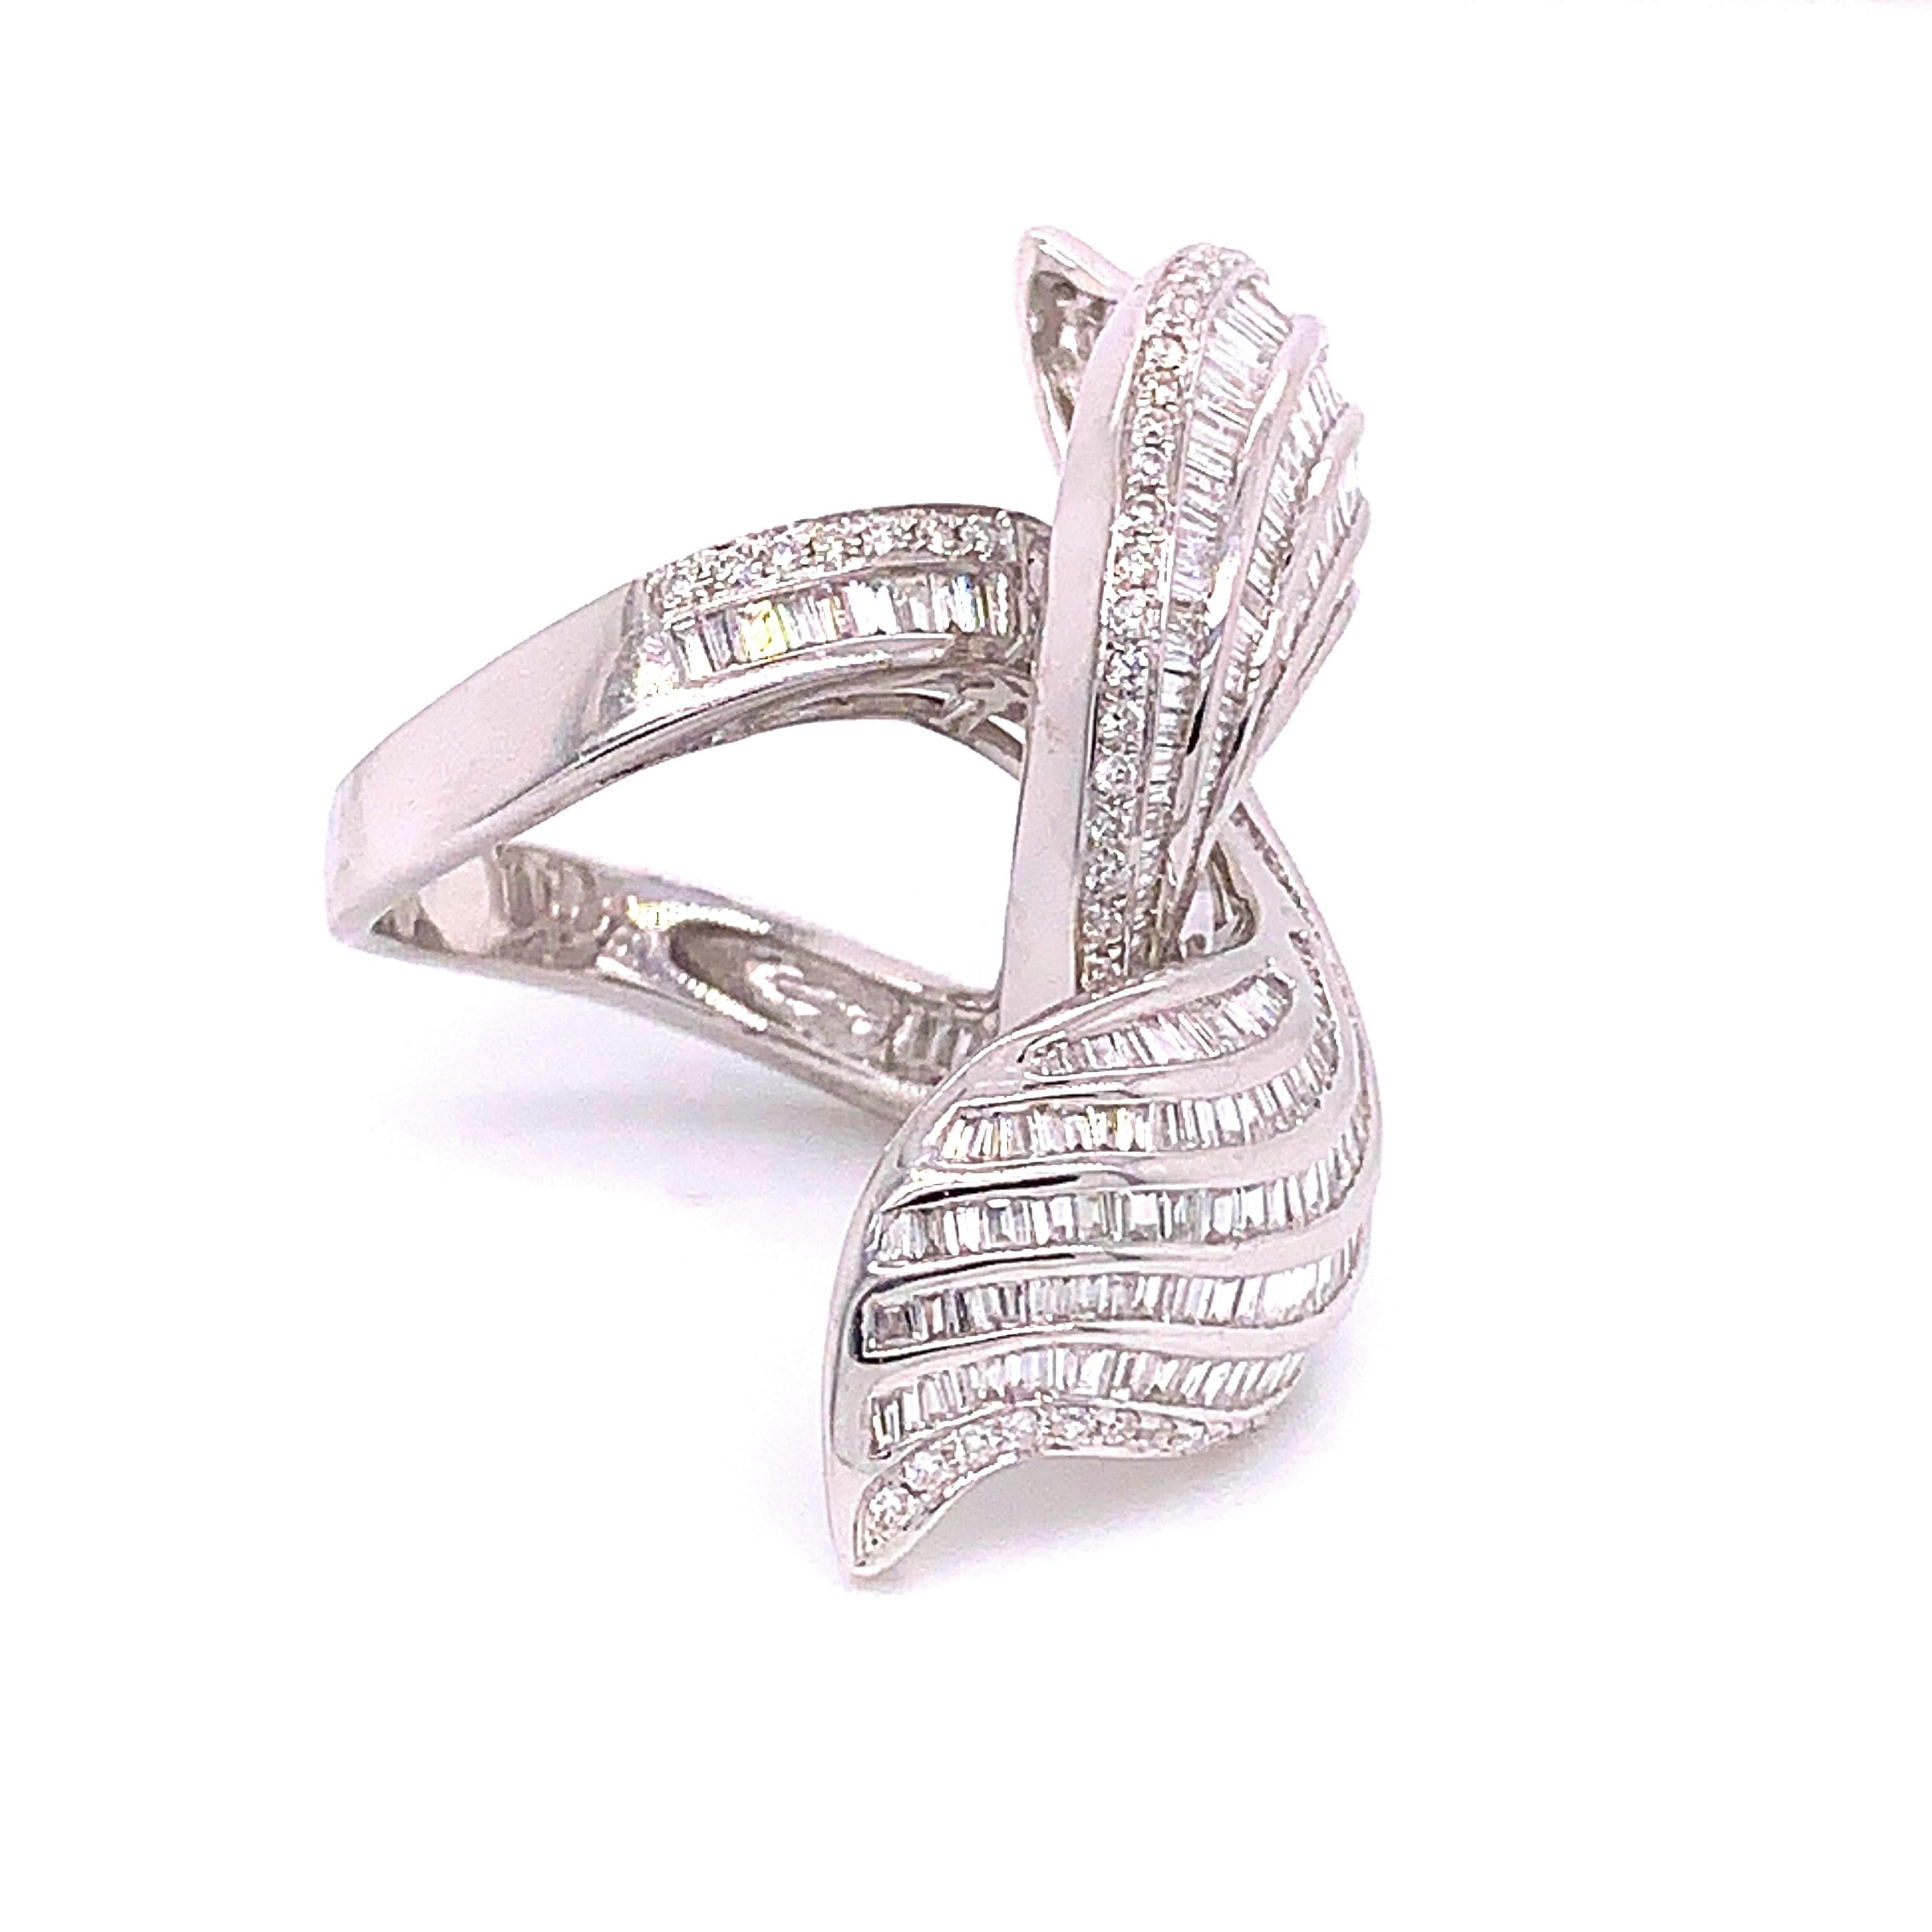 3.6 Carat Twirling Baguette Diamond Ring featuring an unusual and fascinating twirling 6 row design. Set with 333 tapered baguette cut diamonds crafted in 3.11 carats and 74 white round cut diamonds crafted in 0.49 carats.

Diamond And Gold